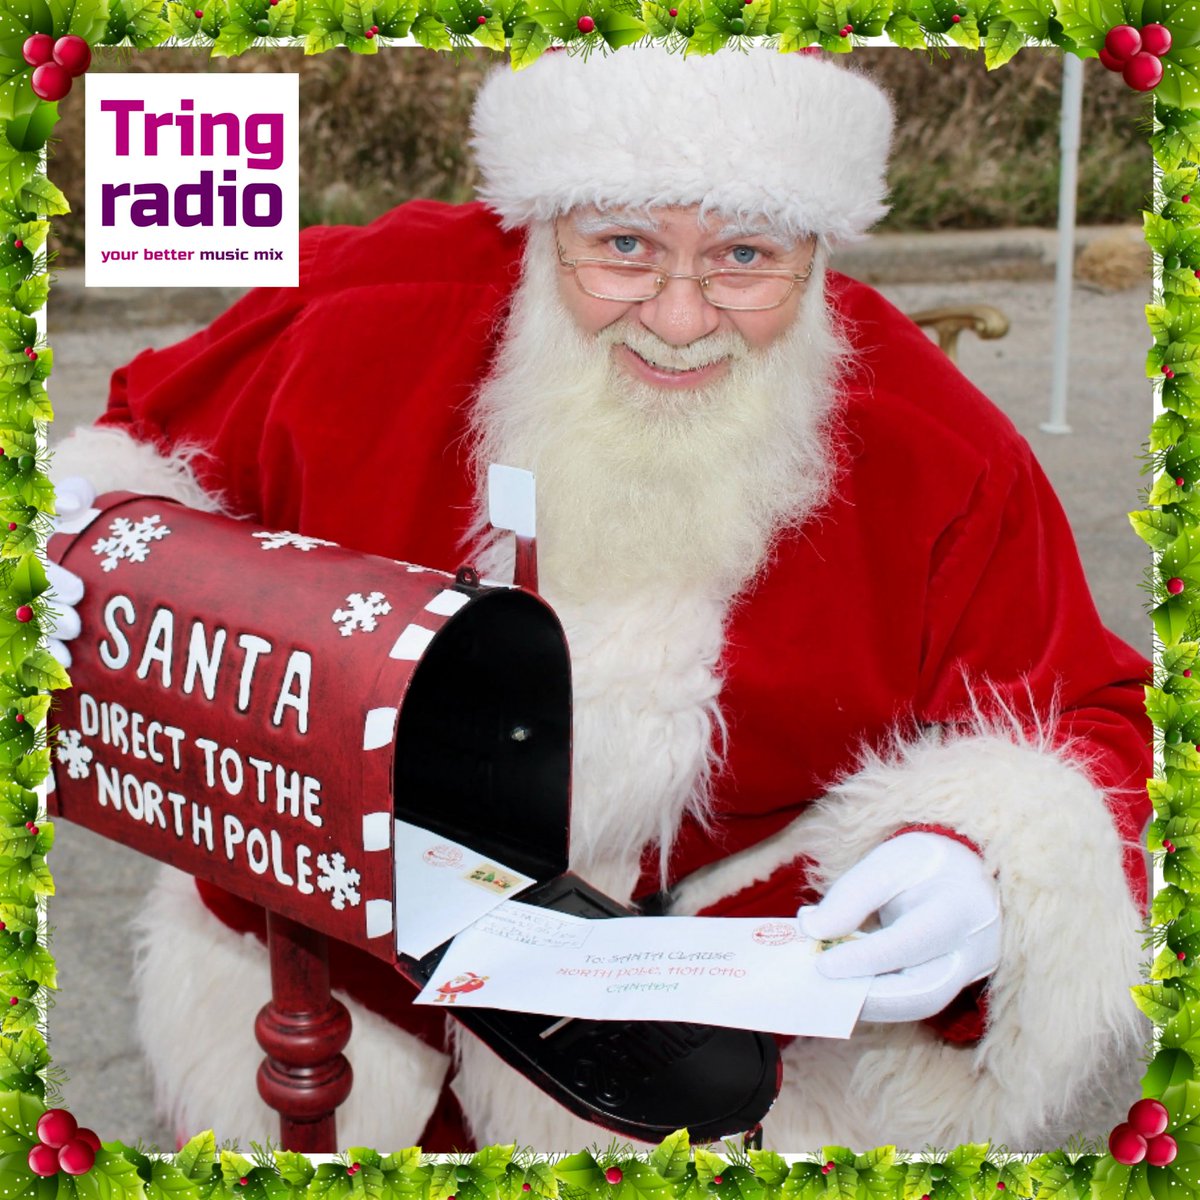 🎅🏻🦌🎁 Today on the business show we’re very excited to welcome the man of the moment, Santa Claus himself as our special guest! Listen in as he explains the logistics and challenges of delivering gifts around the world on Christmas Eve! Live on @TringRadio at noon